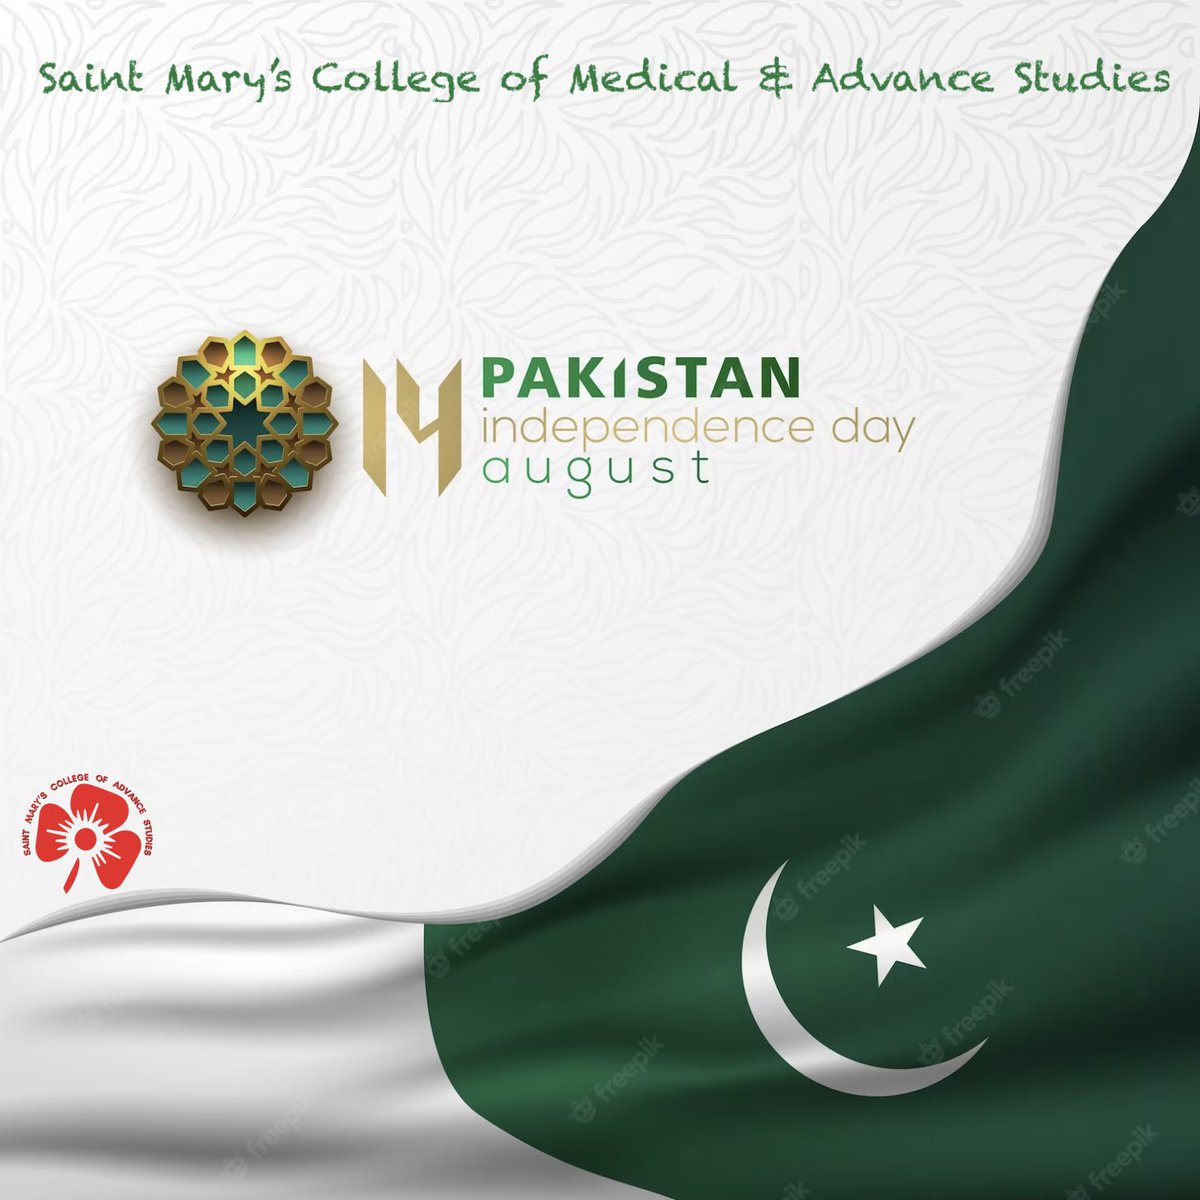 Enrol Now: Diploma in  Medical Sonography | BS RIT | BS MLT | BS Nutrition  (clinical) | BS Biotechnology with Forensic Sc.
BS Biochemistry | BS Microbiology | ADP CS | Pharmacy Technician
#HappyIndependenceDayPakistan , #PakistanZindabad , #75YearsOfPakistan
#ProudToBePakistani